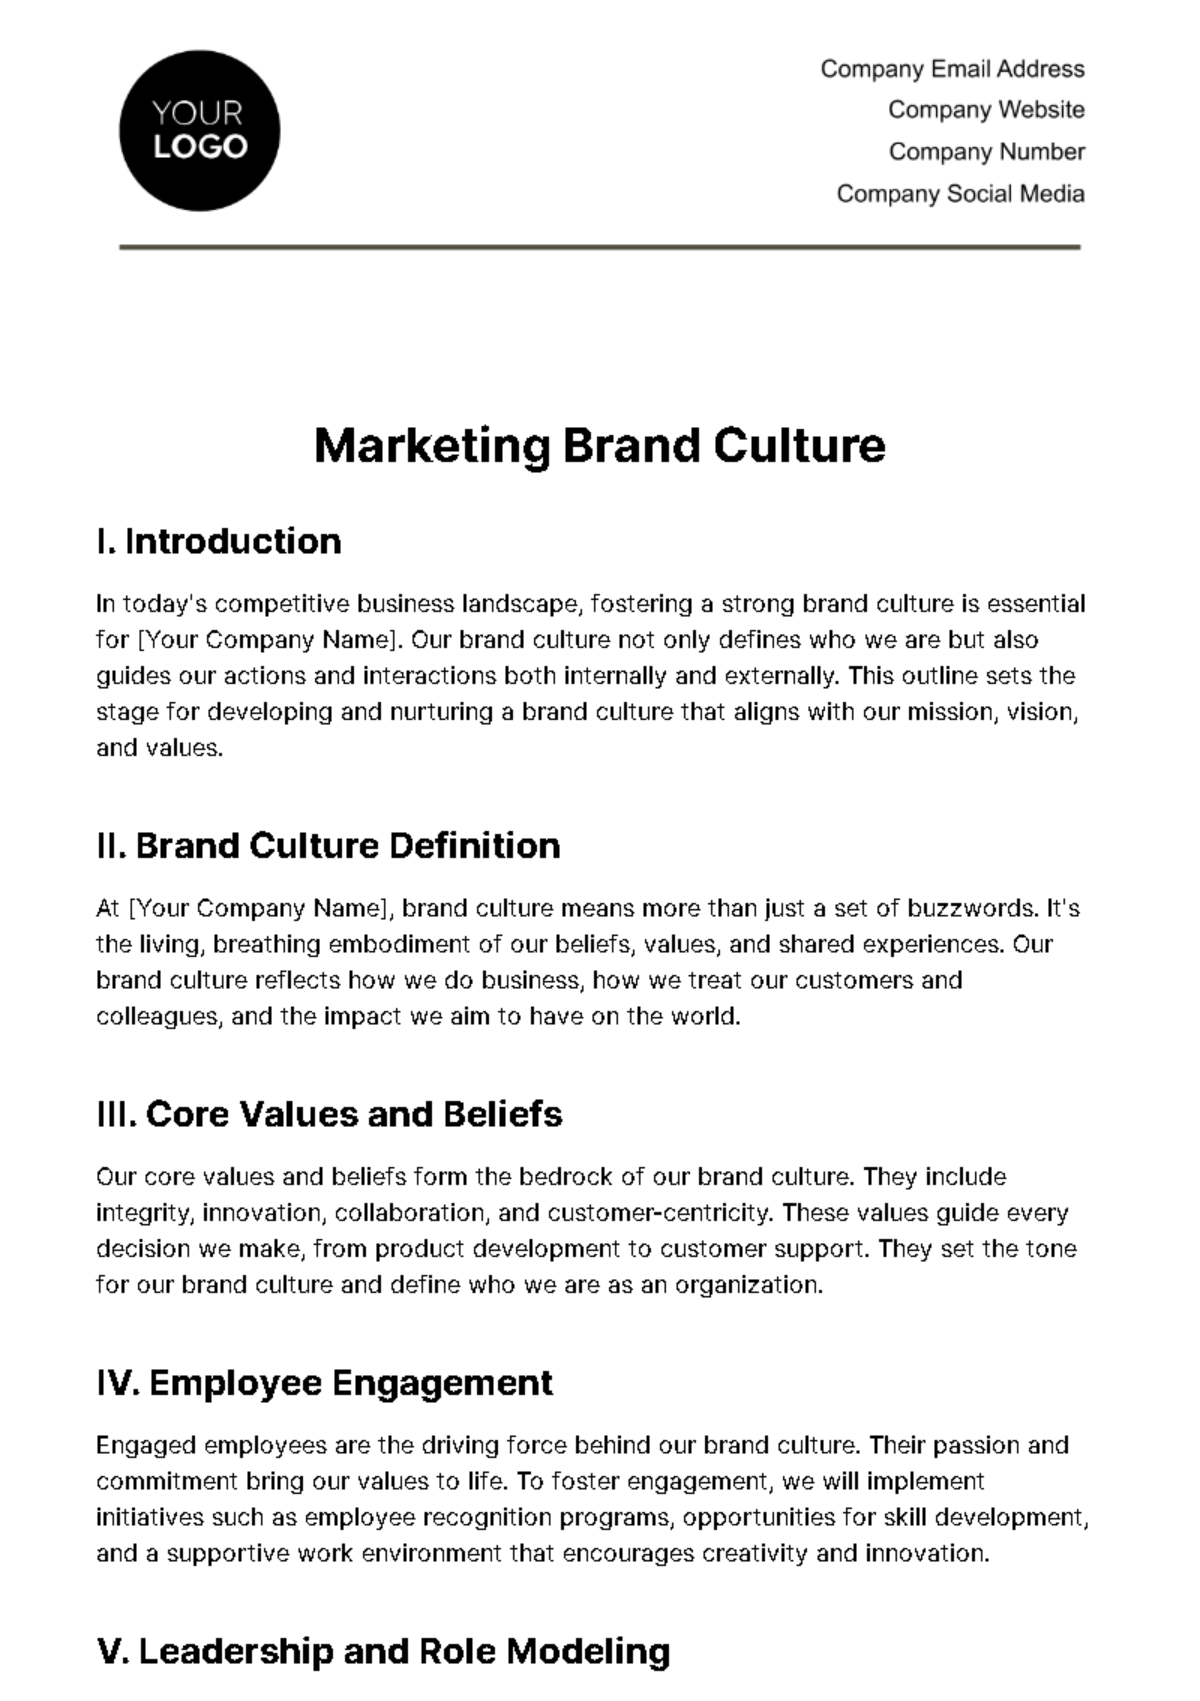 Free Marketing Brand Culture Outline Template